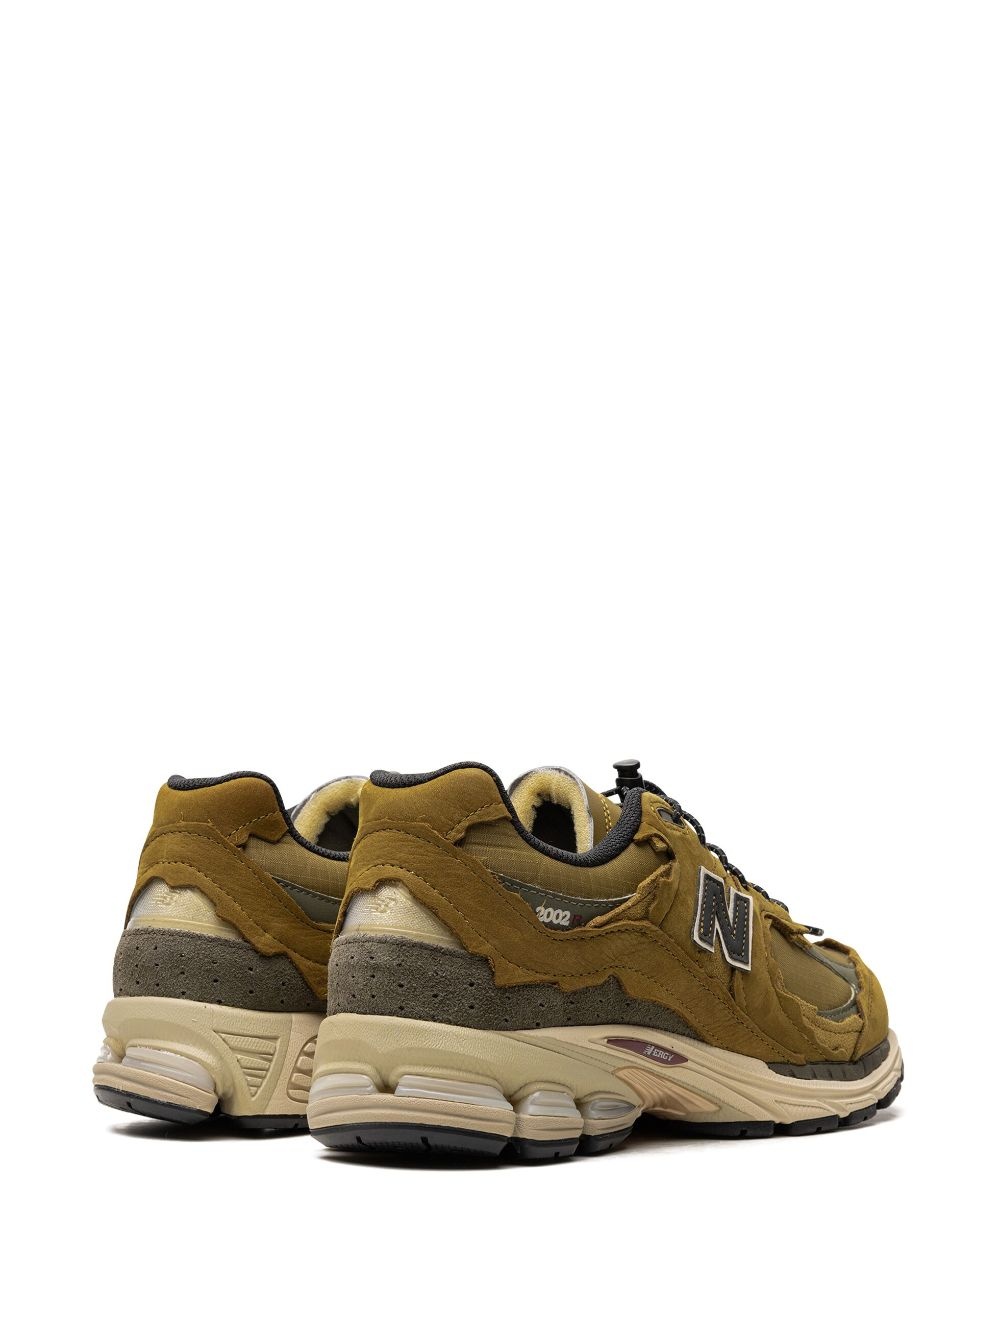 2002R "Protection Pack - High Desert" sneakers - 3